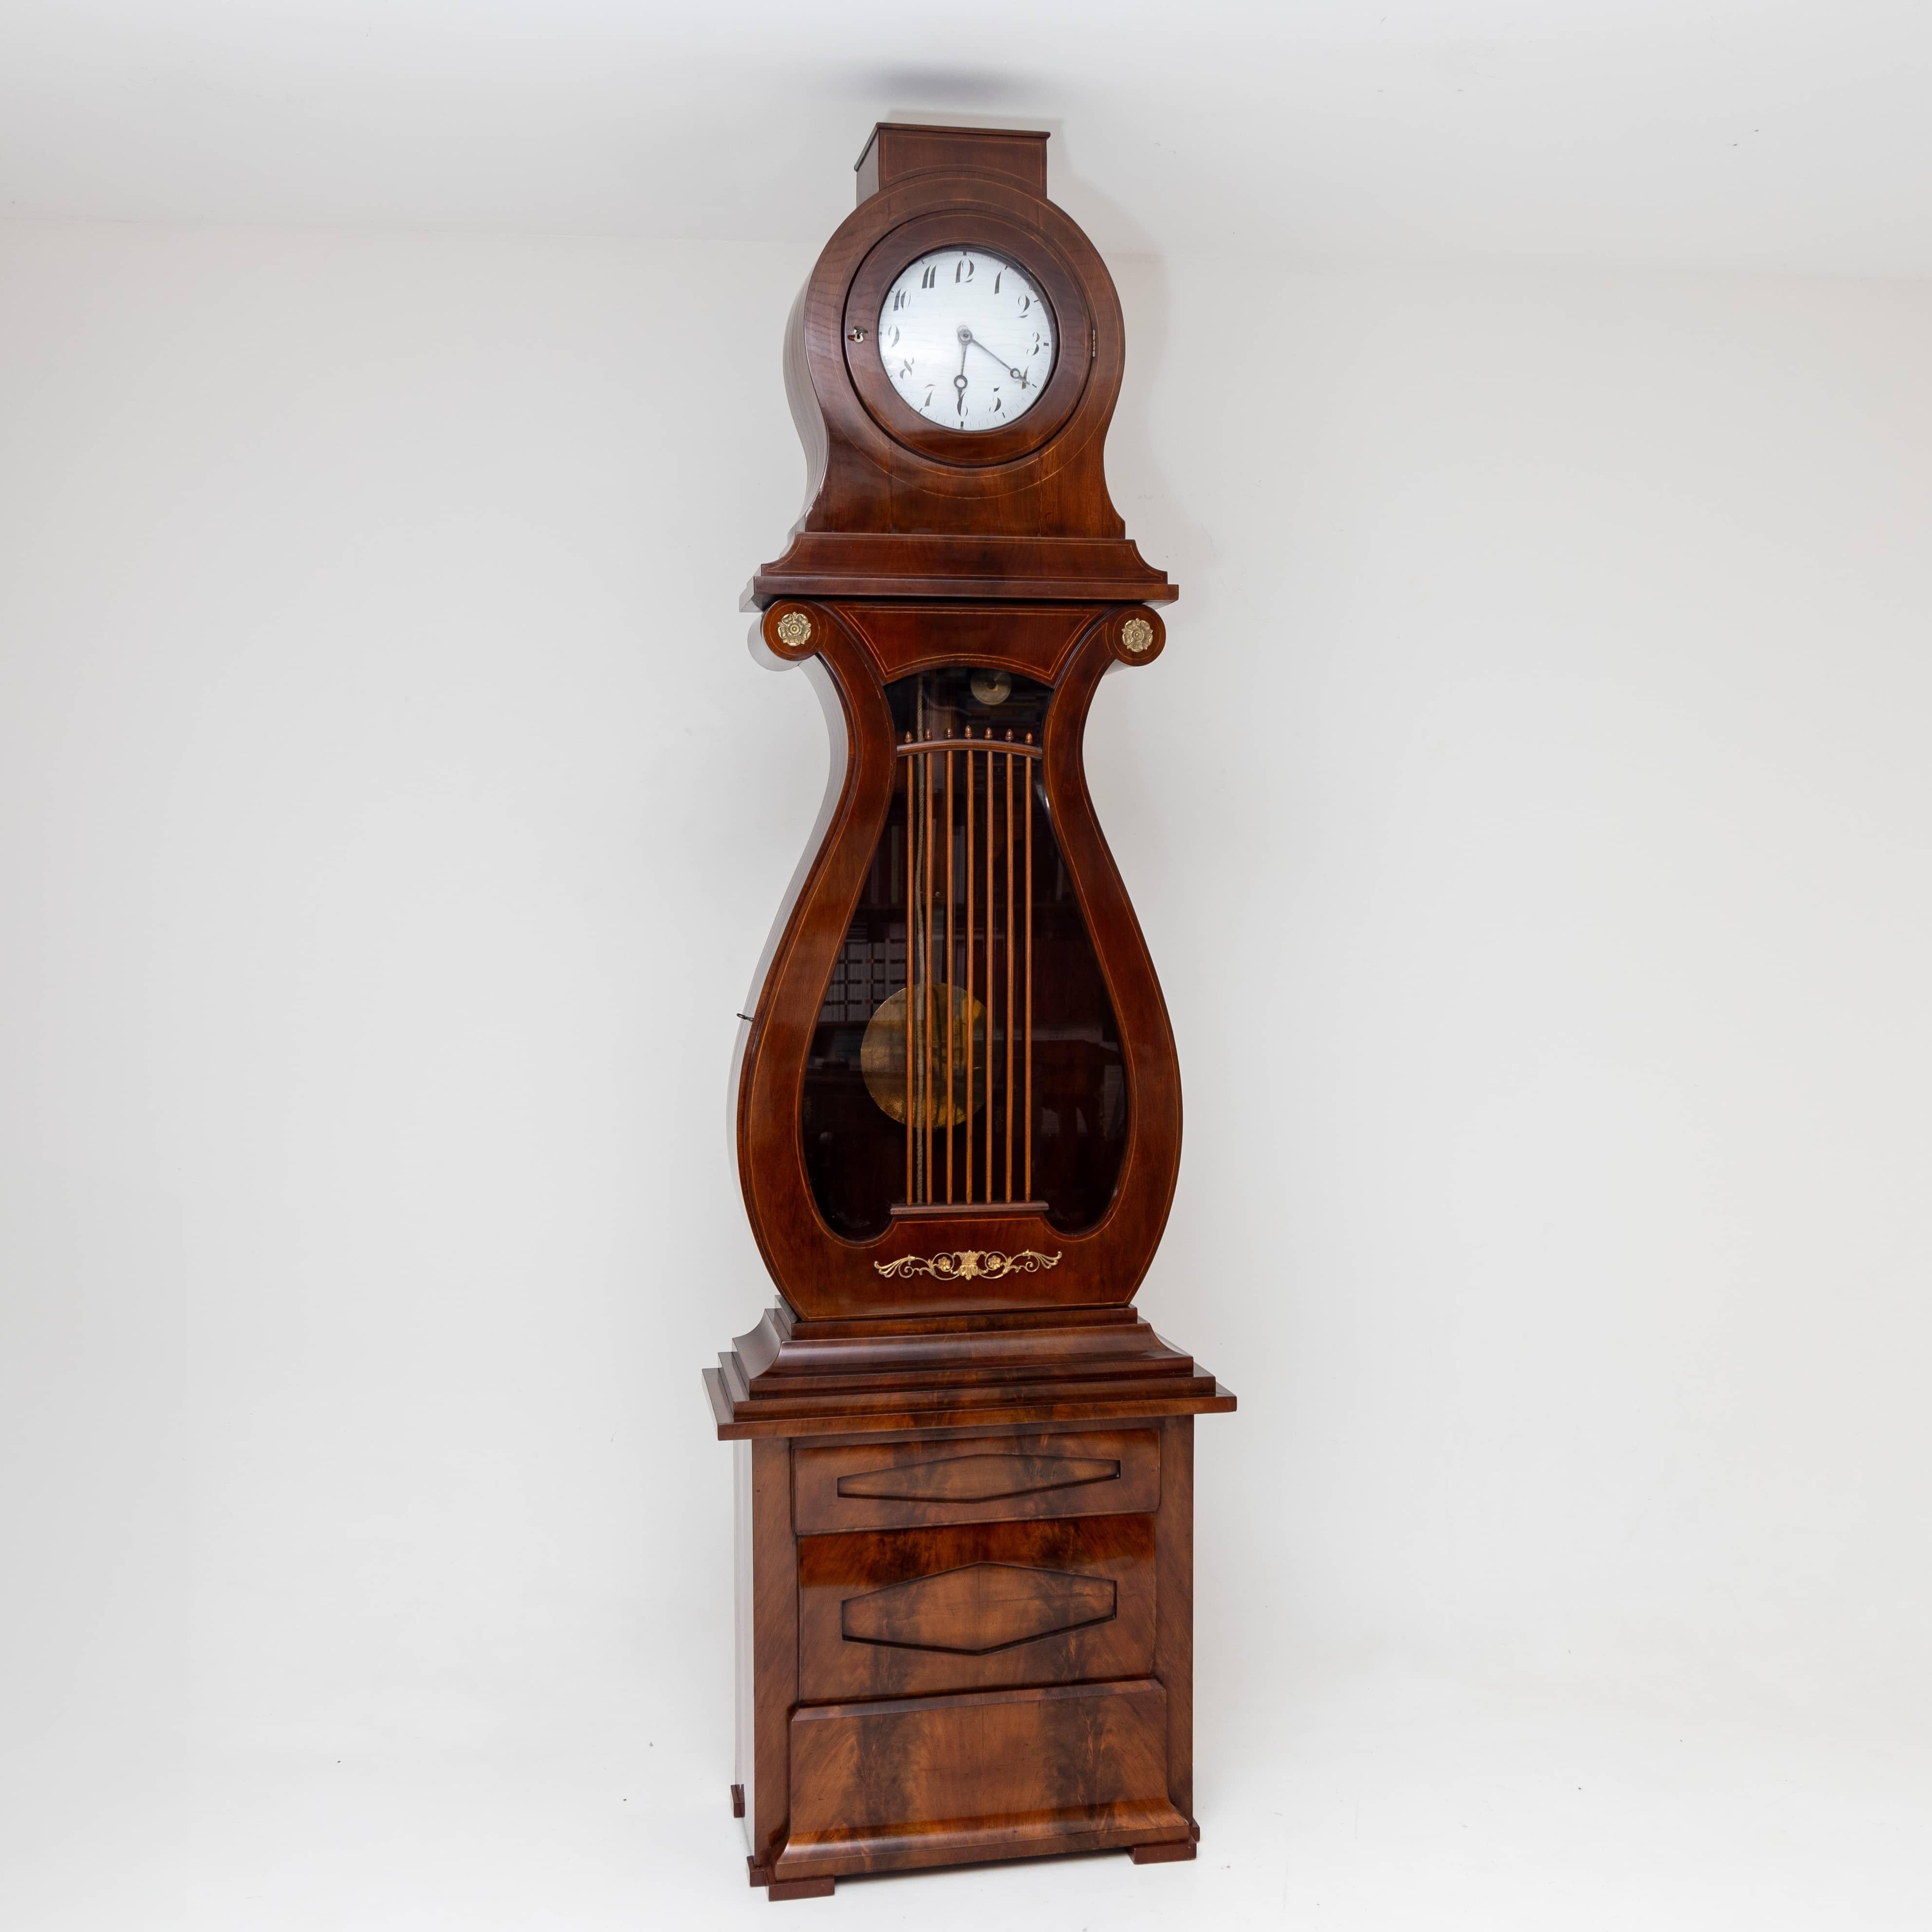 Large Empire grandfather clock with a mahogany-veneered case in the shape of a lyre. The grandfather clock stands on a chest with three drawers and diamond-shaped fillings. Above it rises the lyre-shaped pendulum case with strings out of wooden bars